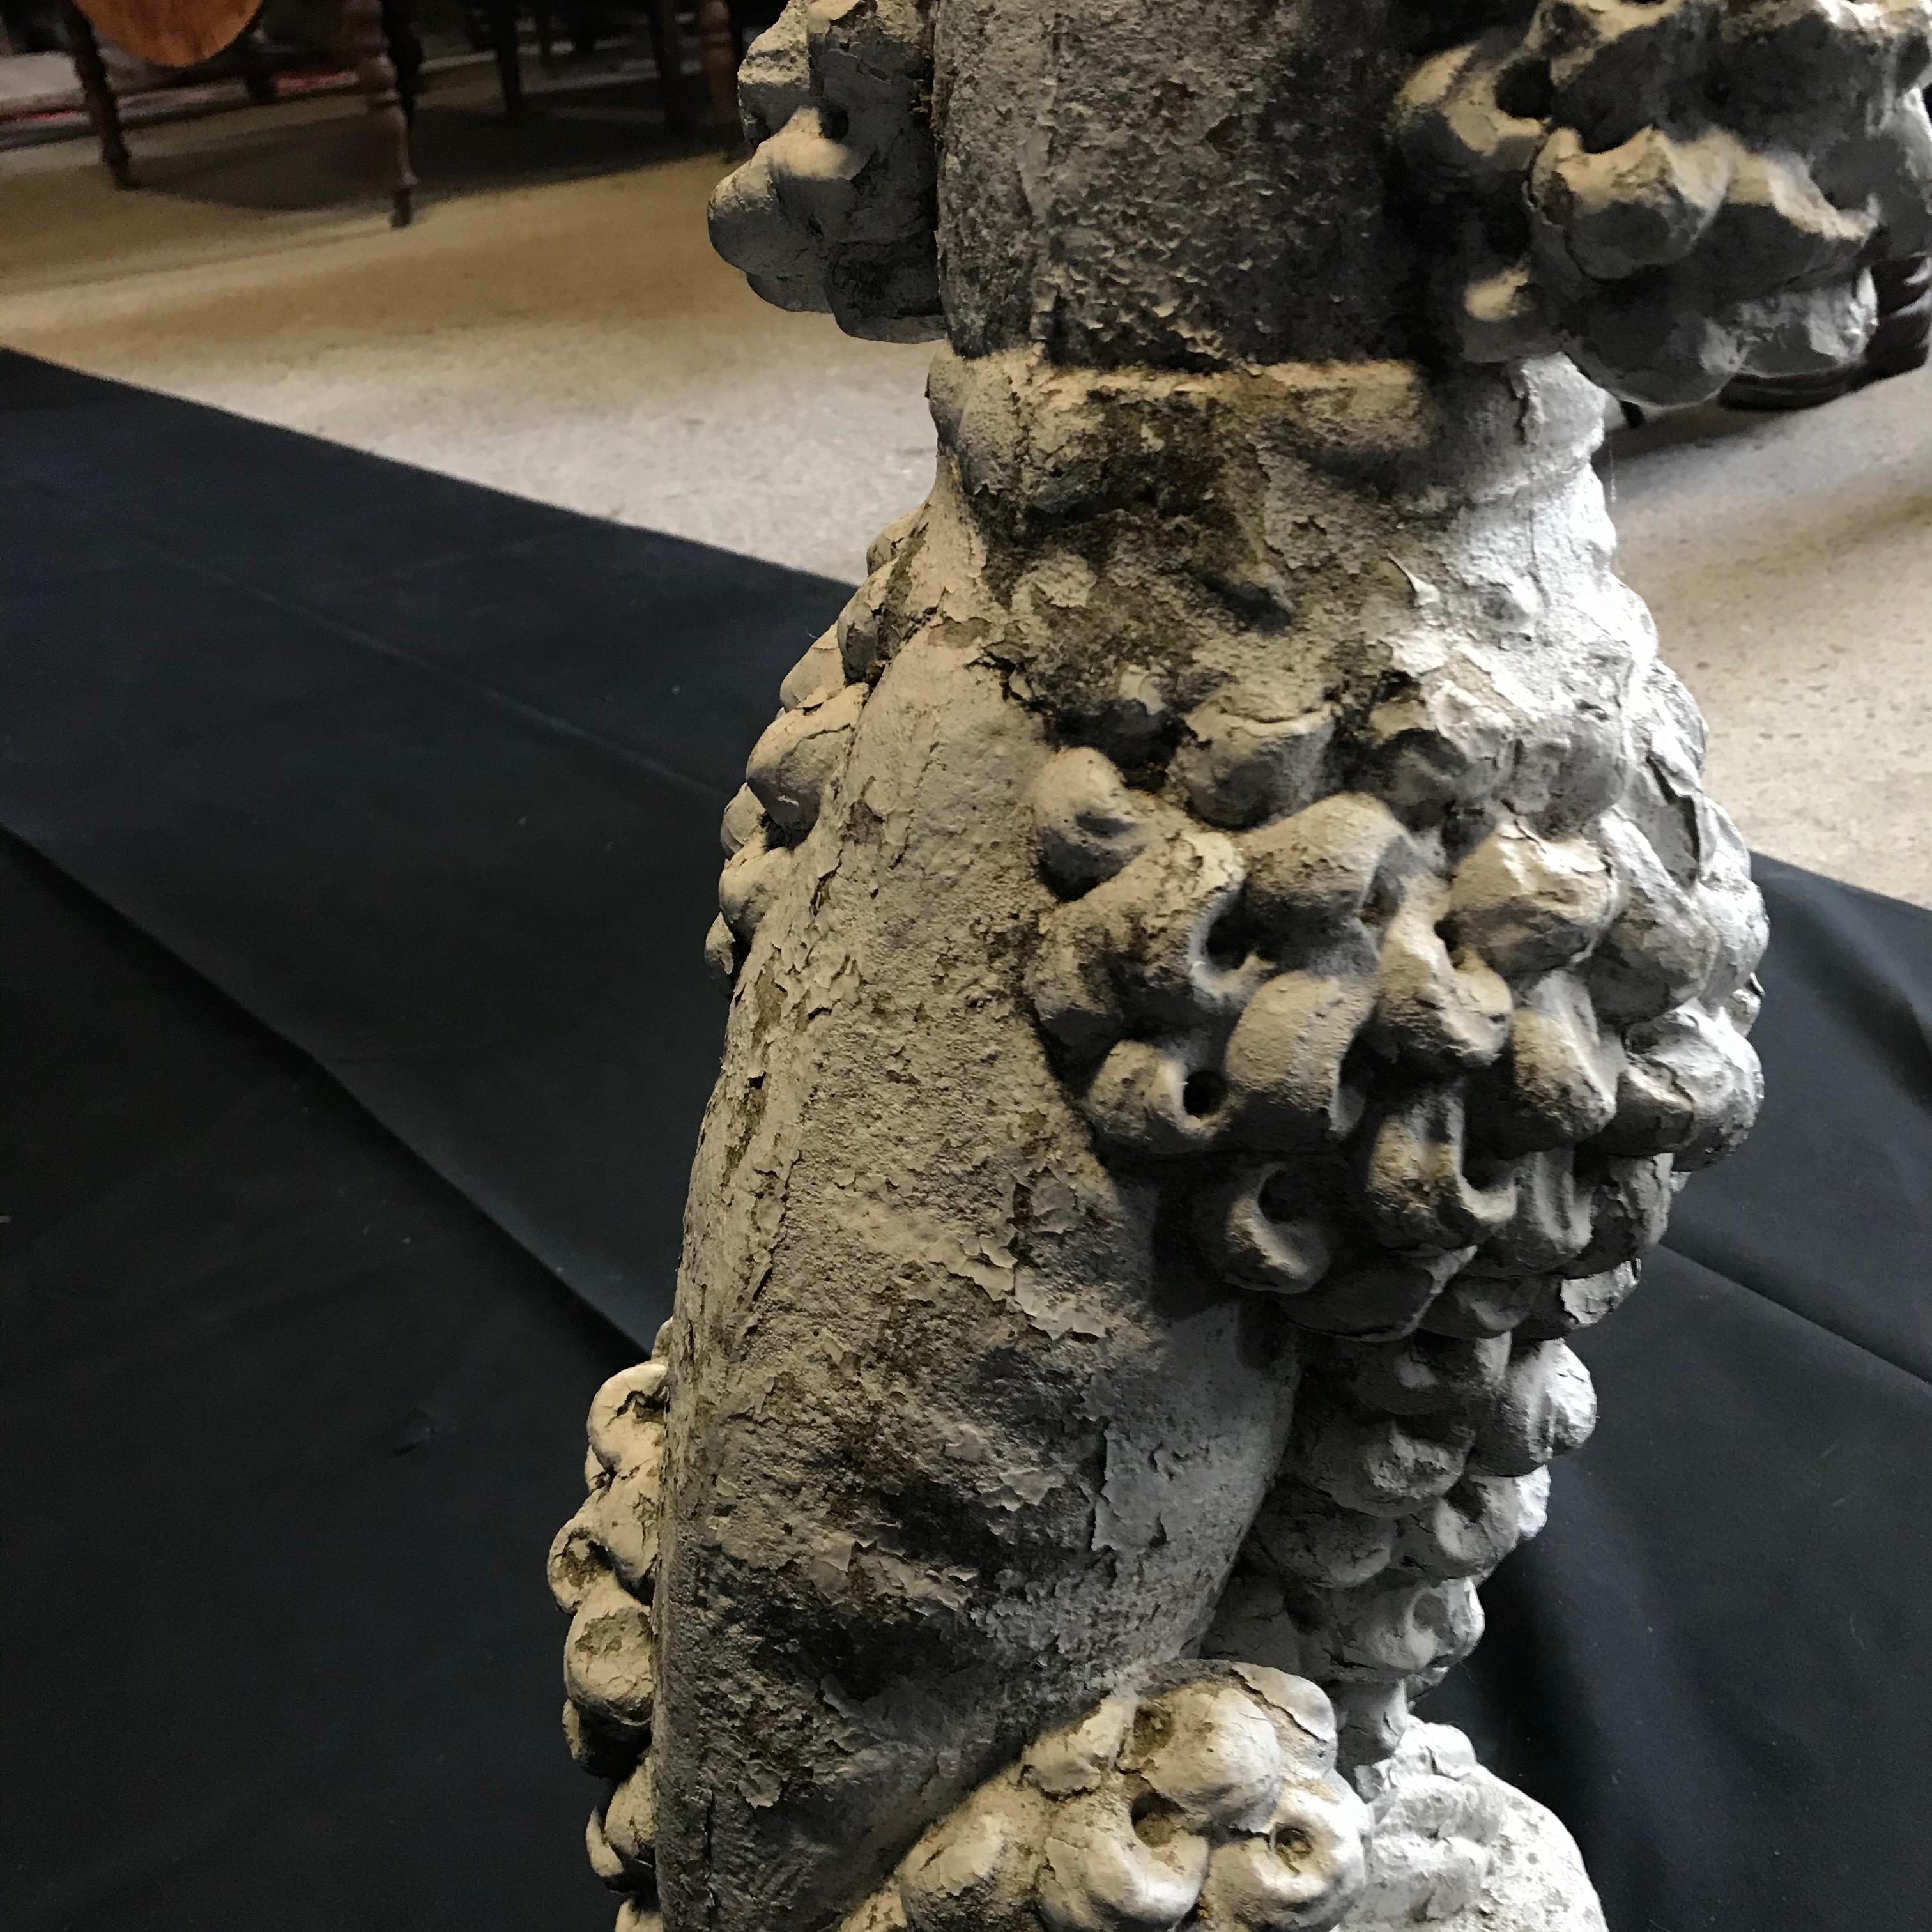 Dog Lovers' Life-Sized Stone French Poodle Sculpture Statue 2